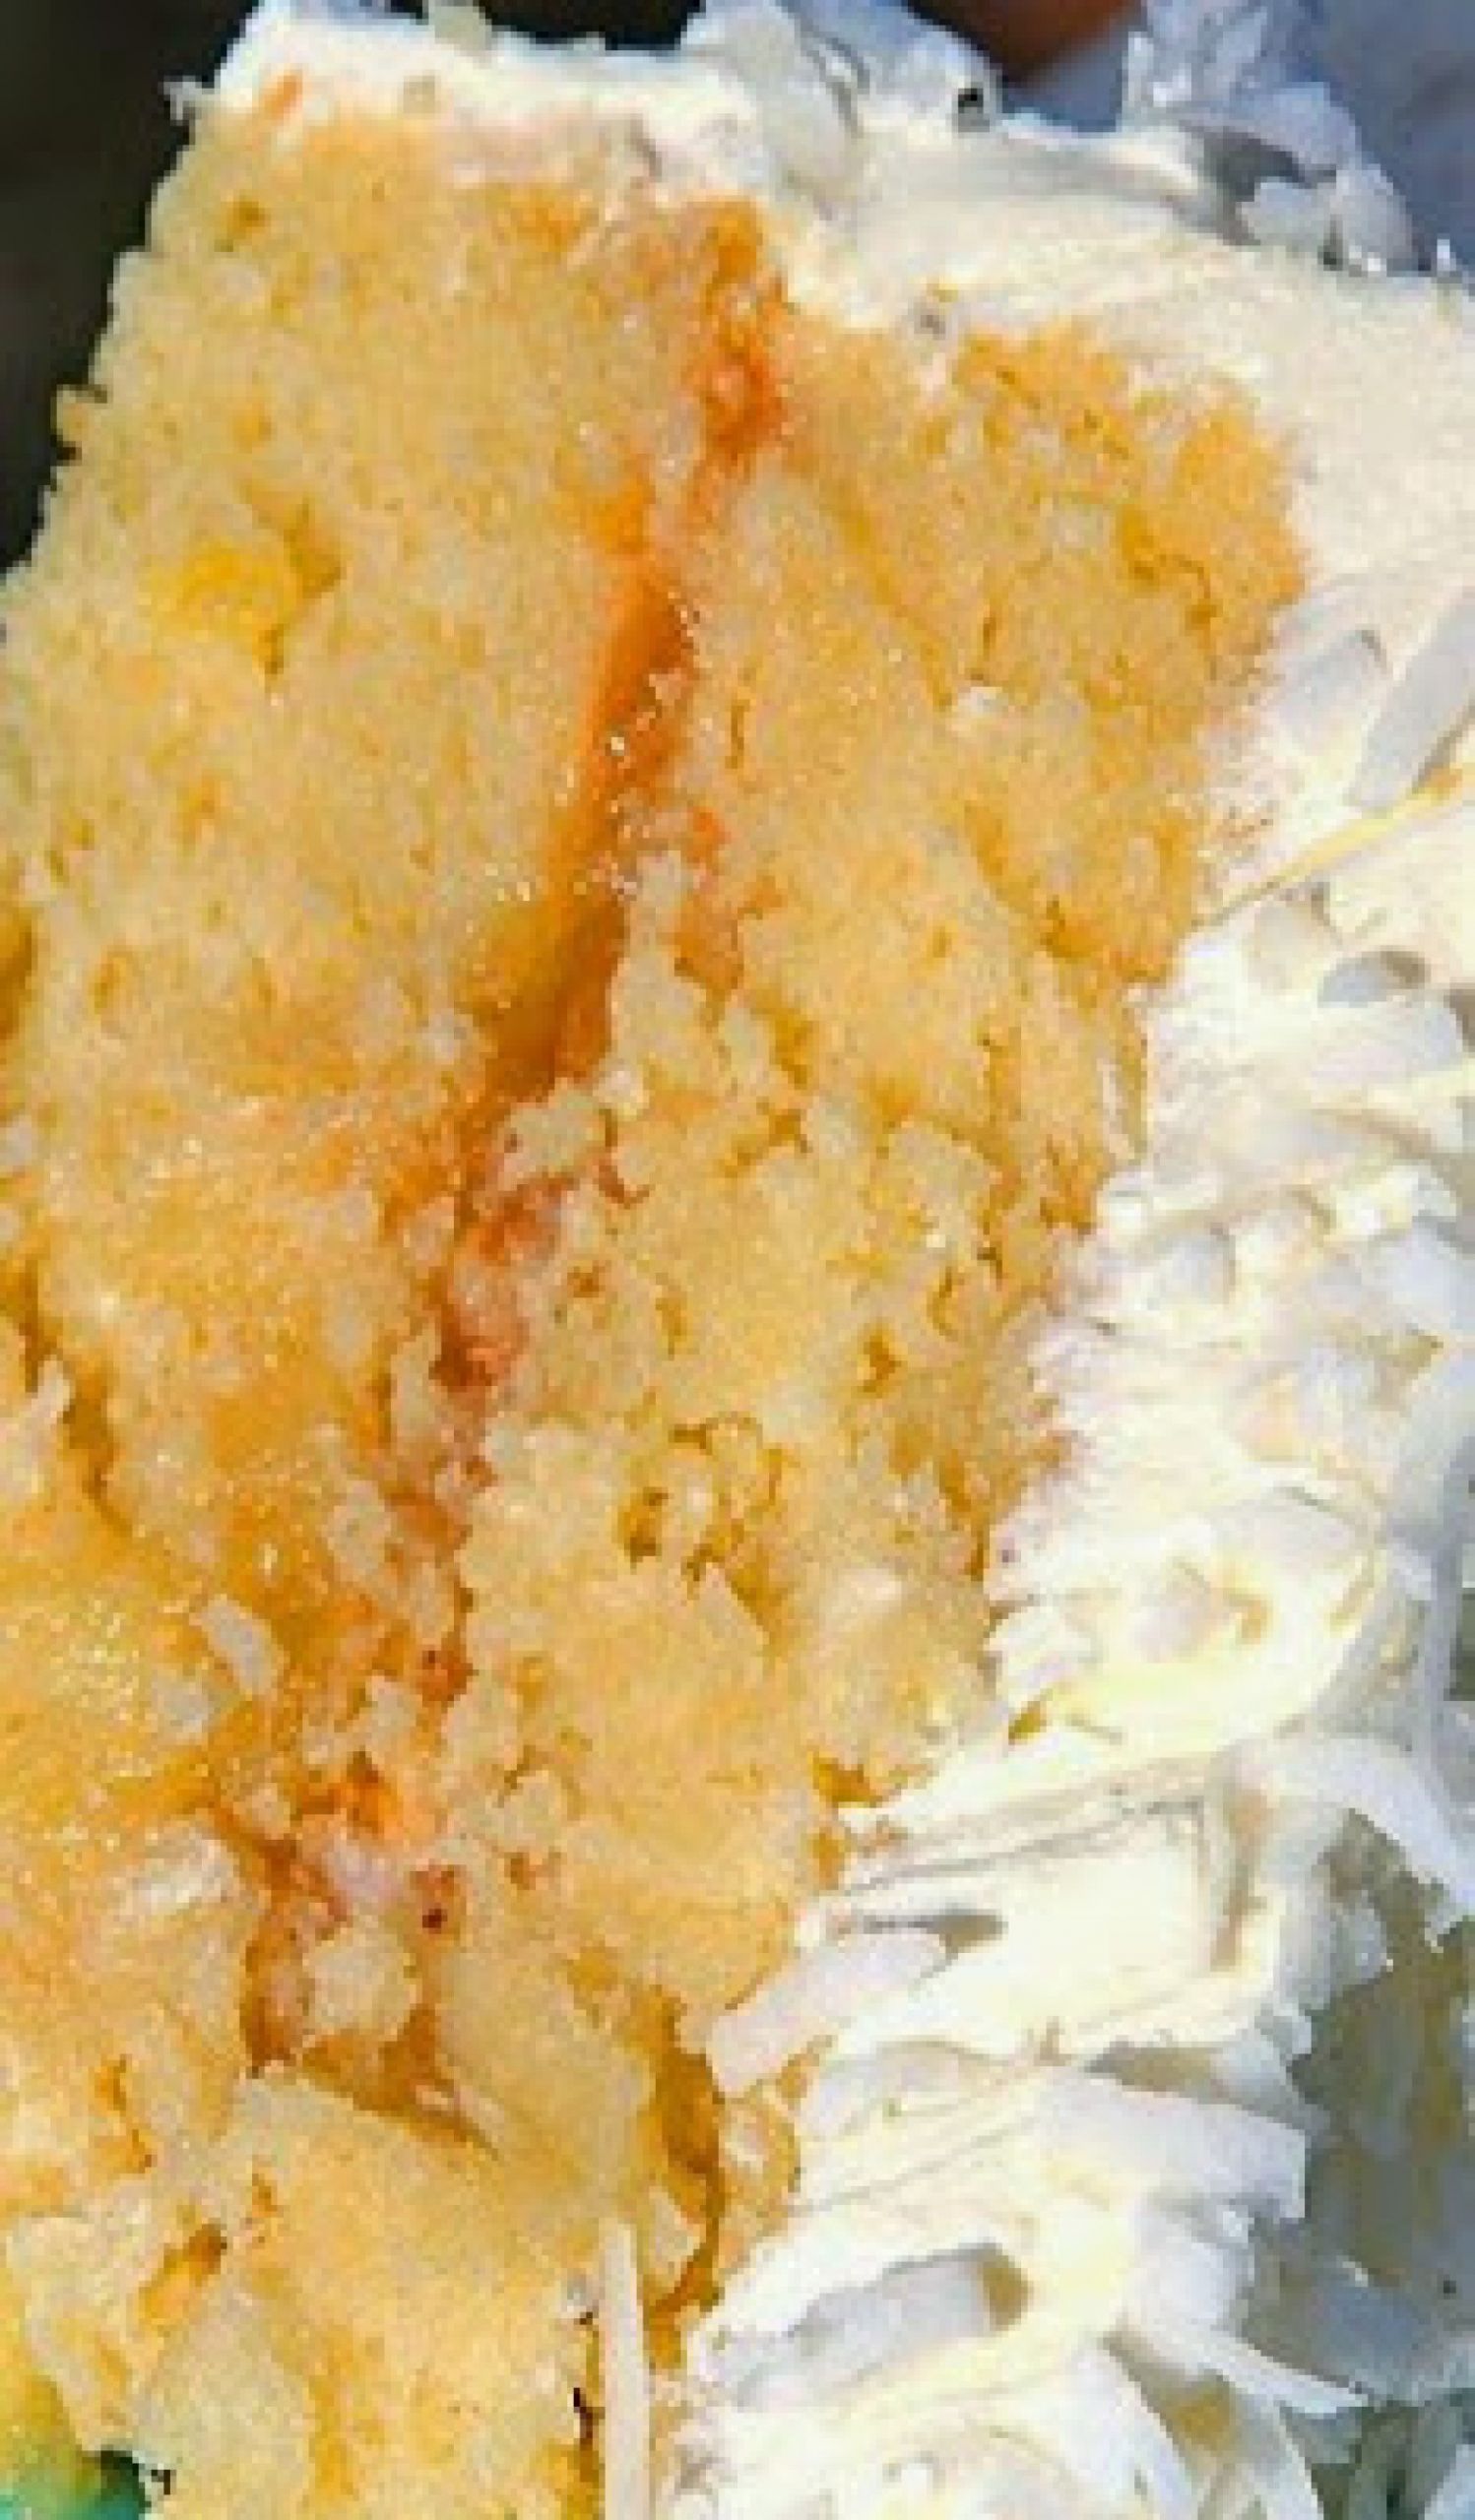 Southern Pineapple Coconut Cake
 Nanny s Famous Coconut Pineapple Cake Recipe 2